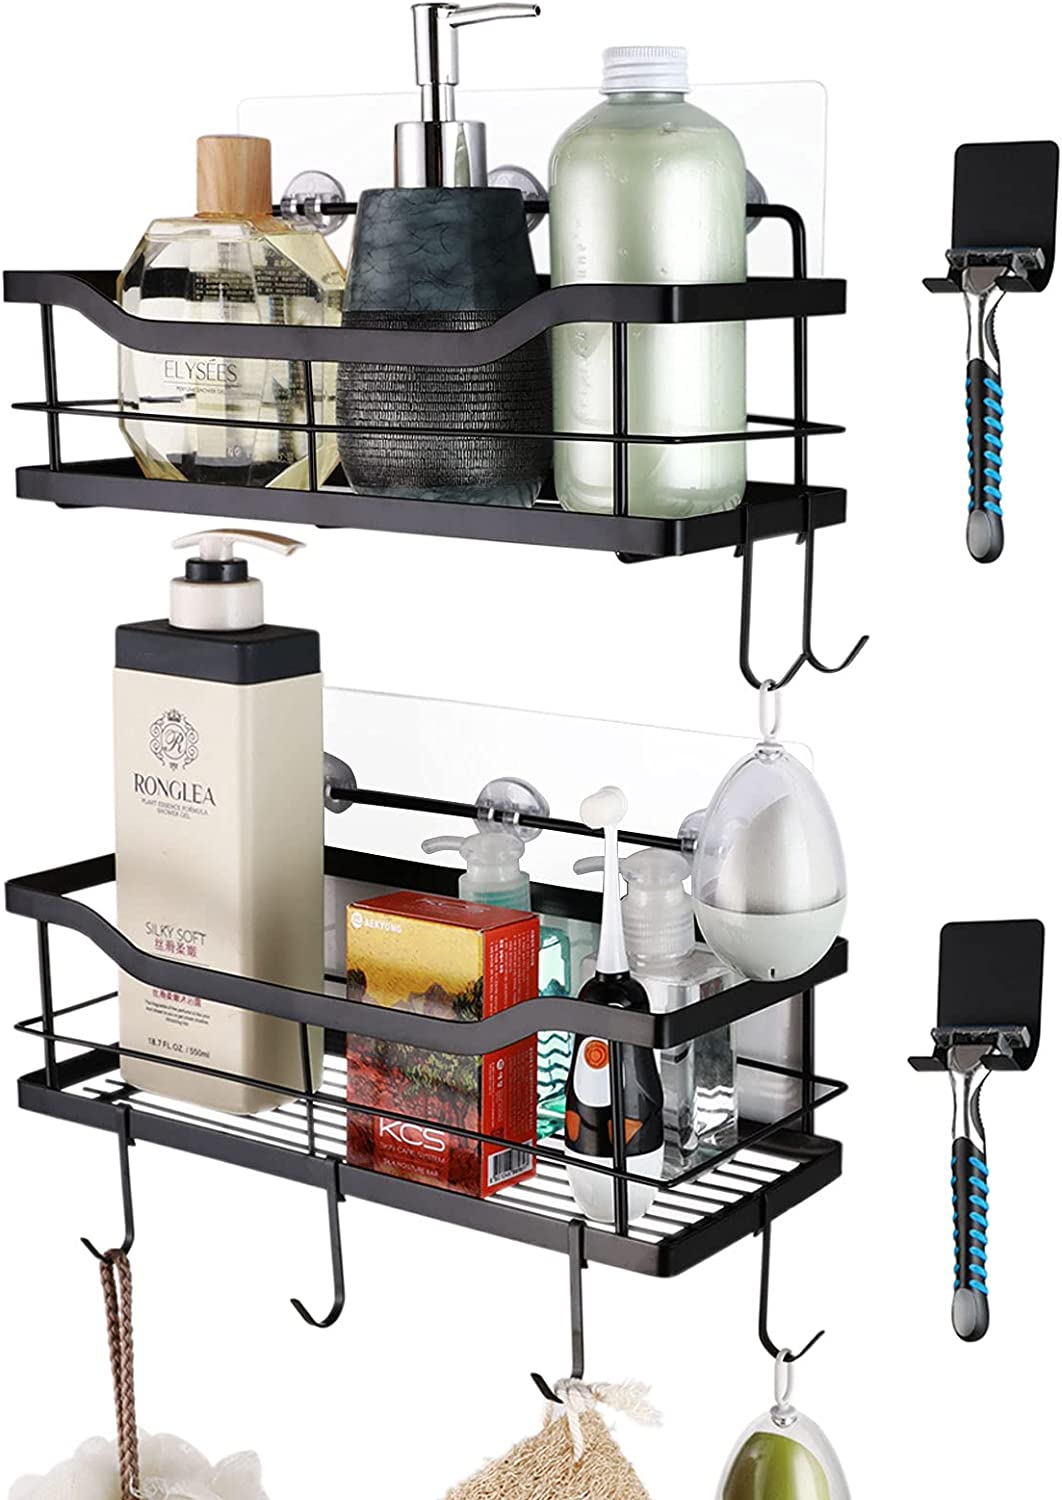 NearMoon Adhesive Shower Caddy Basket Shelf with Hooks, No Drilling Bathroom Organizer Shelf, SUS 304 Stainless Steel 2-in-1 Kitchen Spice Racks- Wall Mounted Storage Basket, 2 Pack (Brushed Nickel)